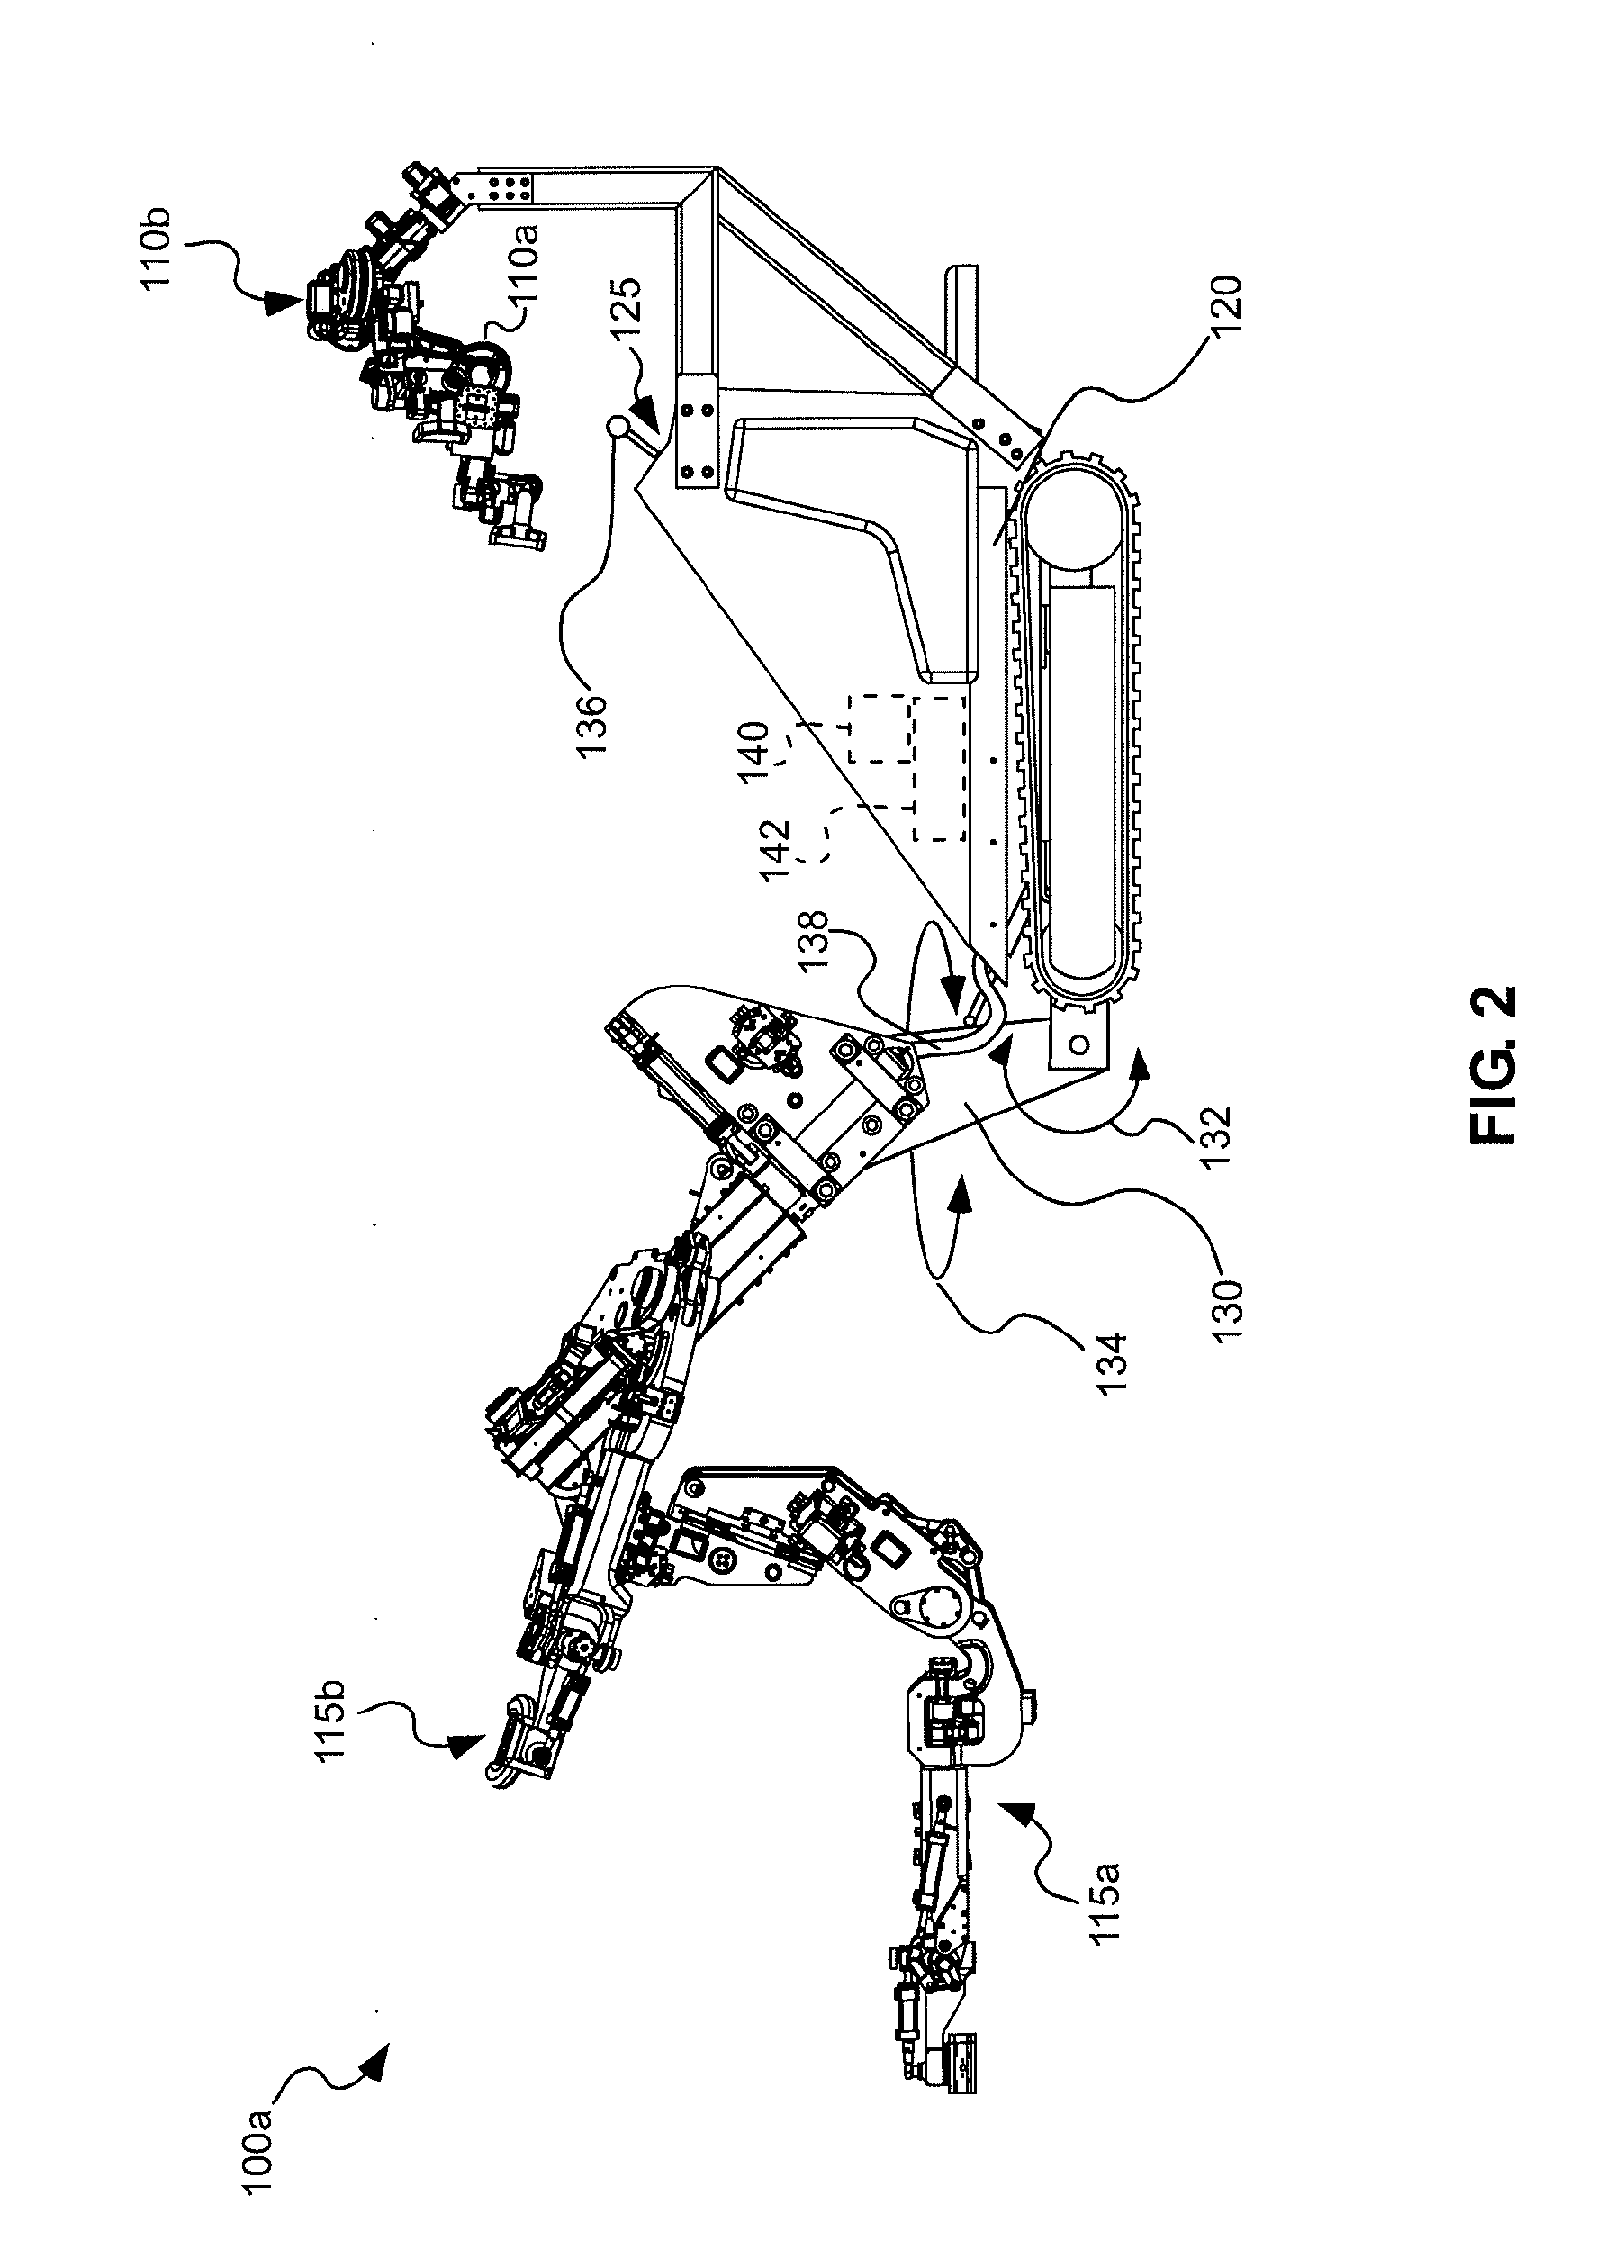 Multi-Degree of Freedom Torso Support For a Robotic Agile Lift System